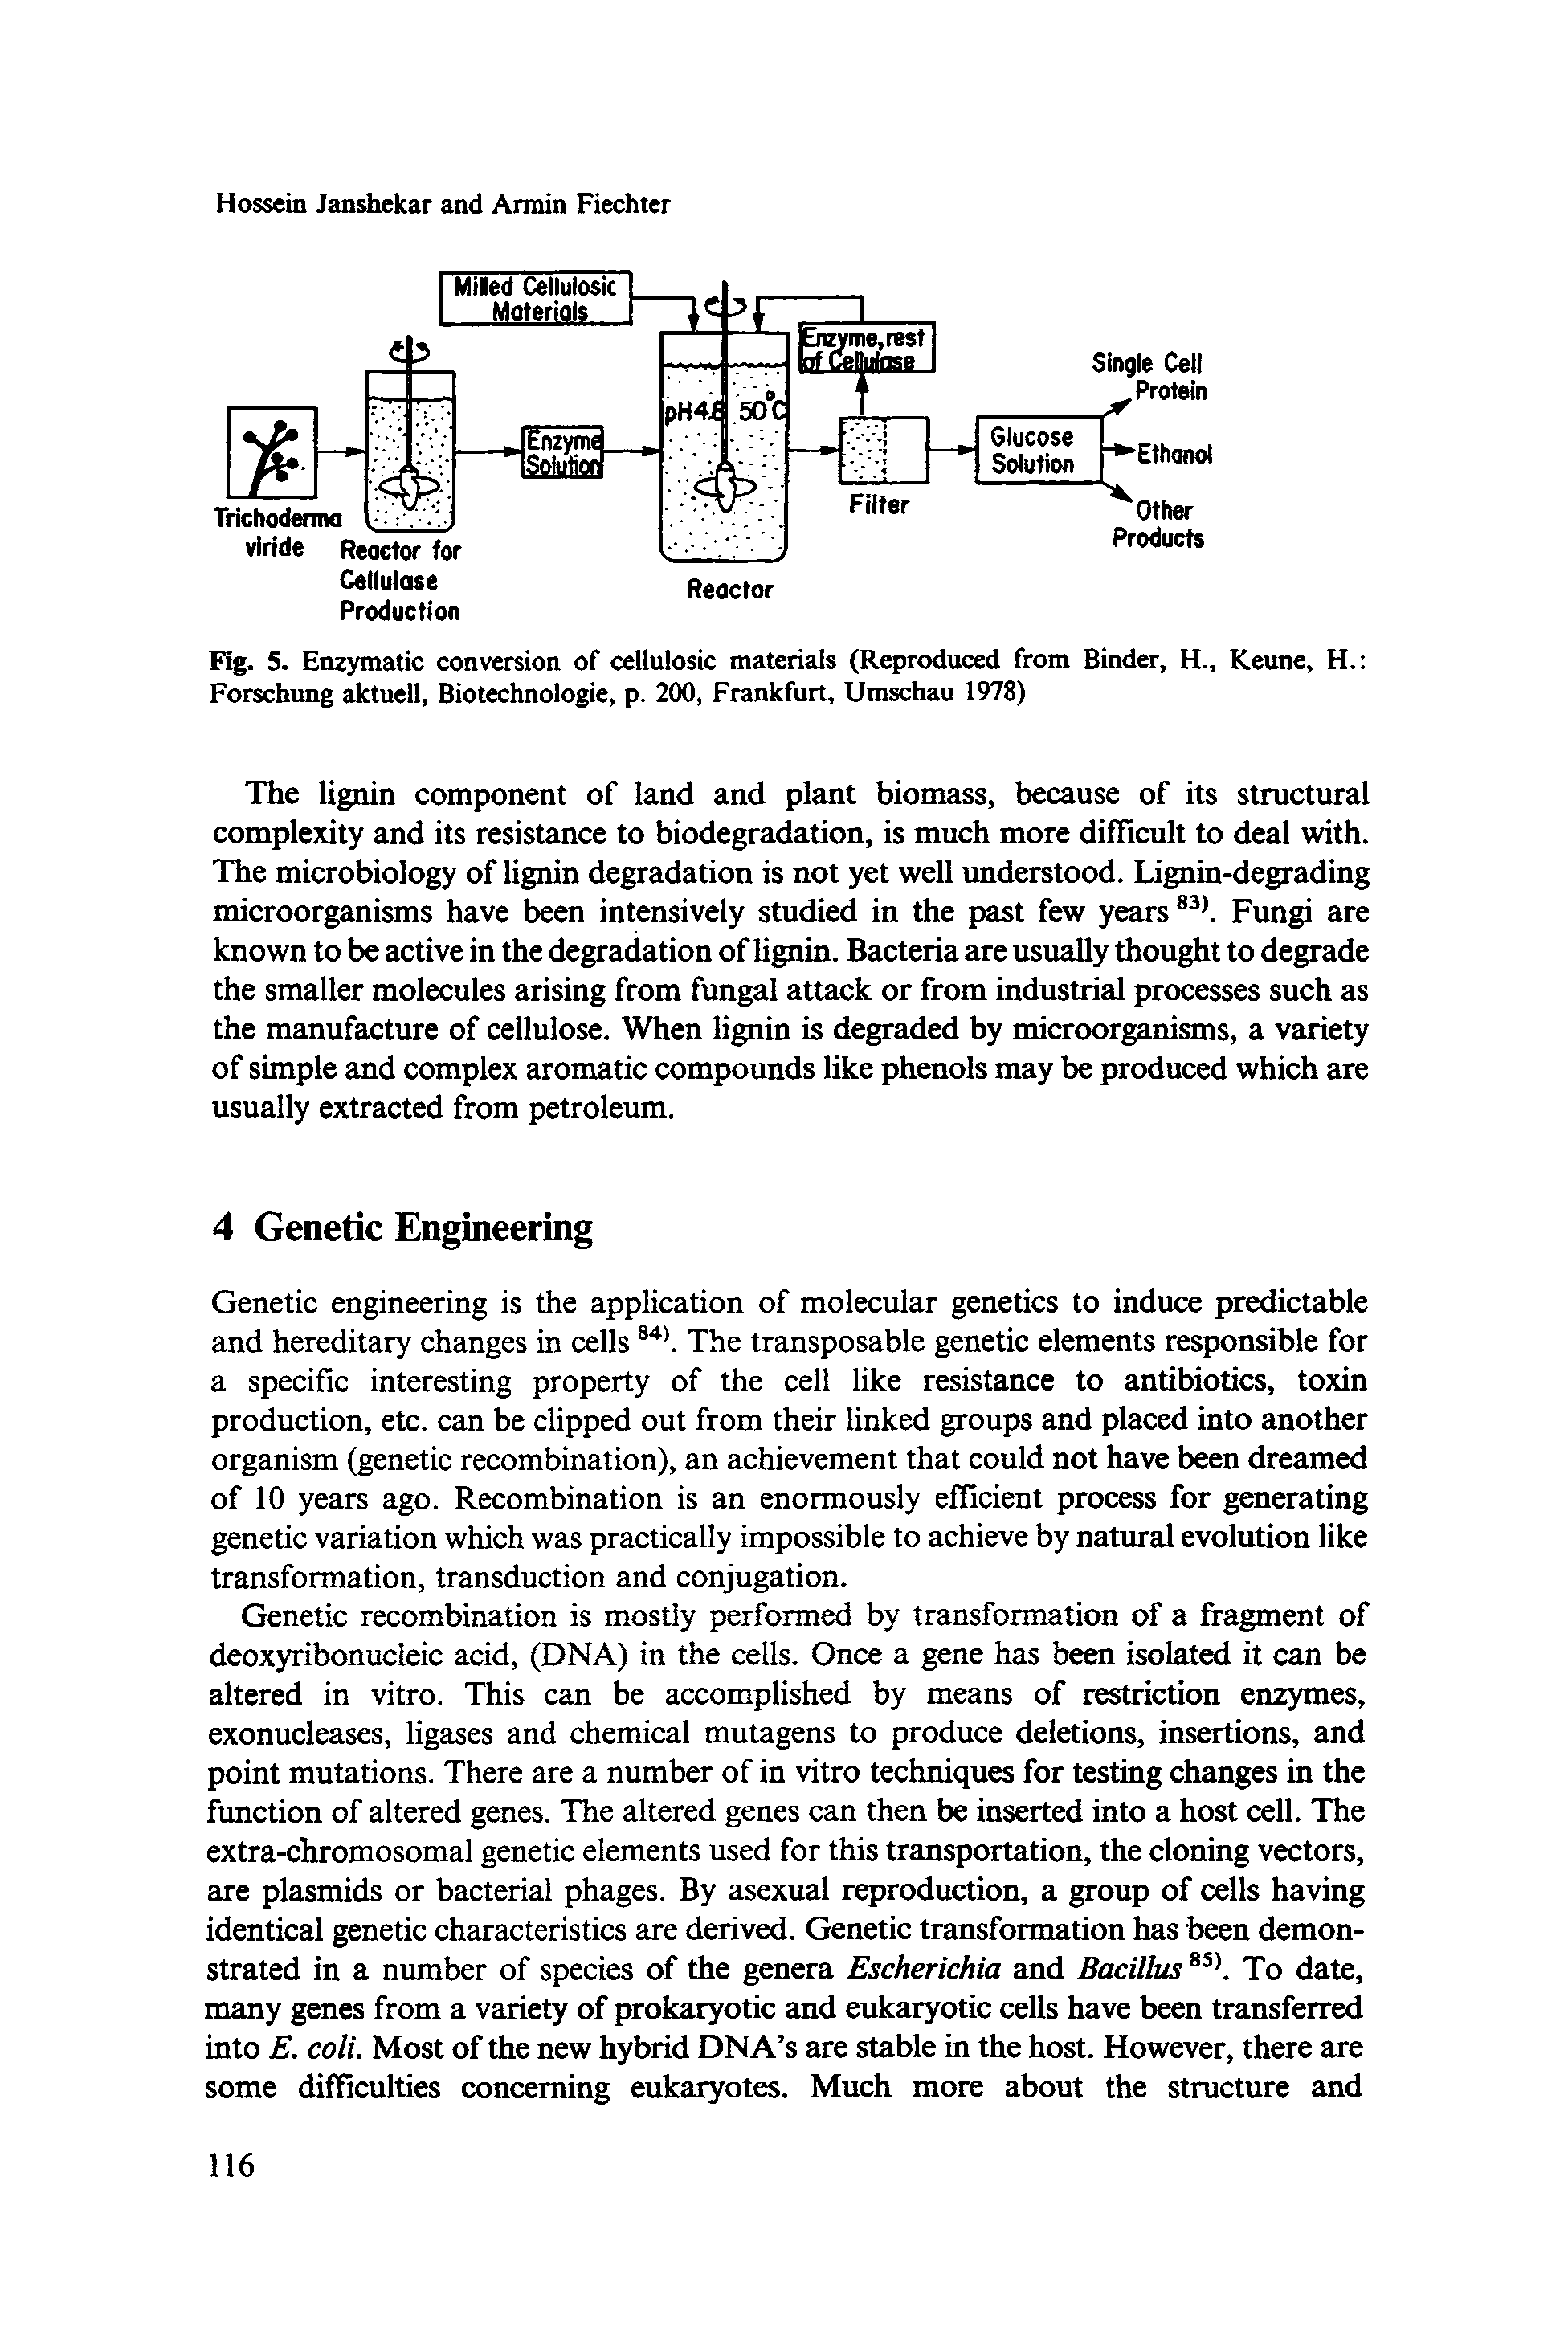 Fig. 5. Enzymatic conversion of cellulosic materials (Reproduced from Binder, H., Keune, H. Forschung aktuell, Biotechnologie, p. 200, Frankfurt, Umschau 1978)...